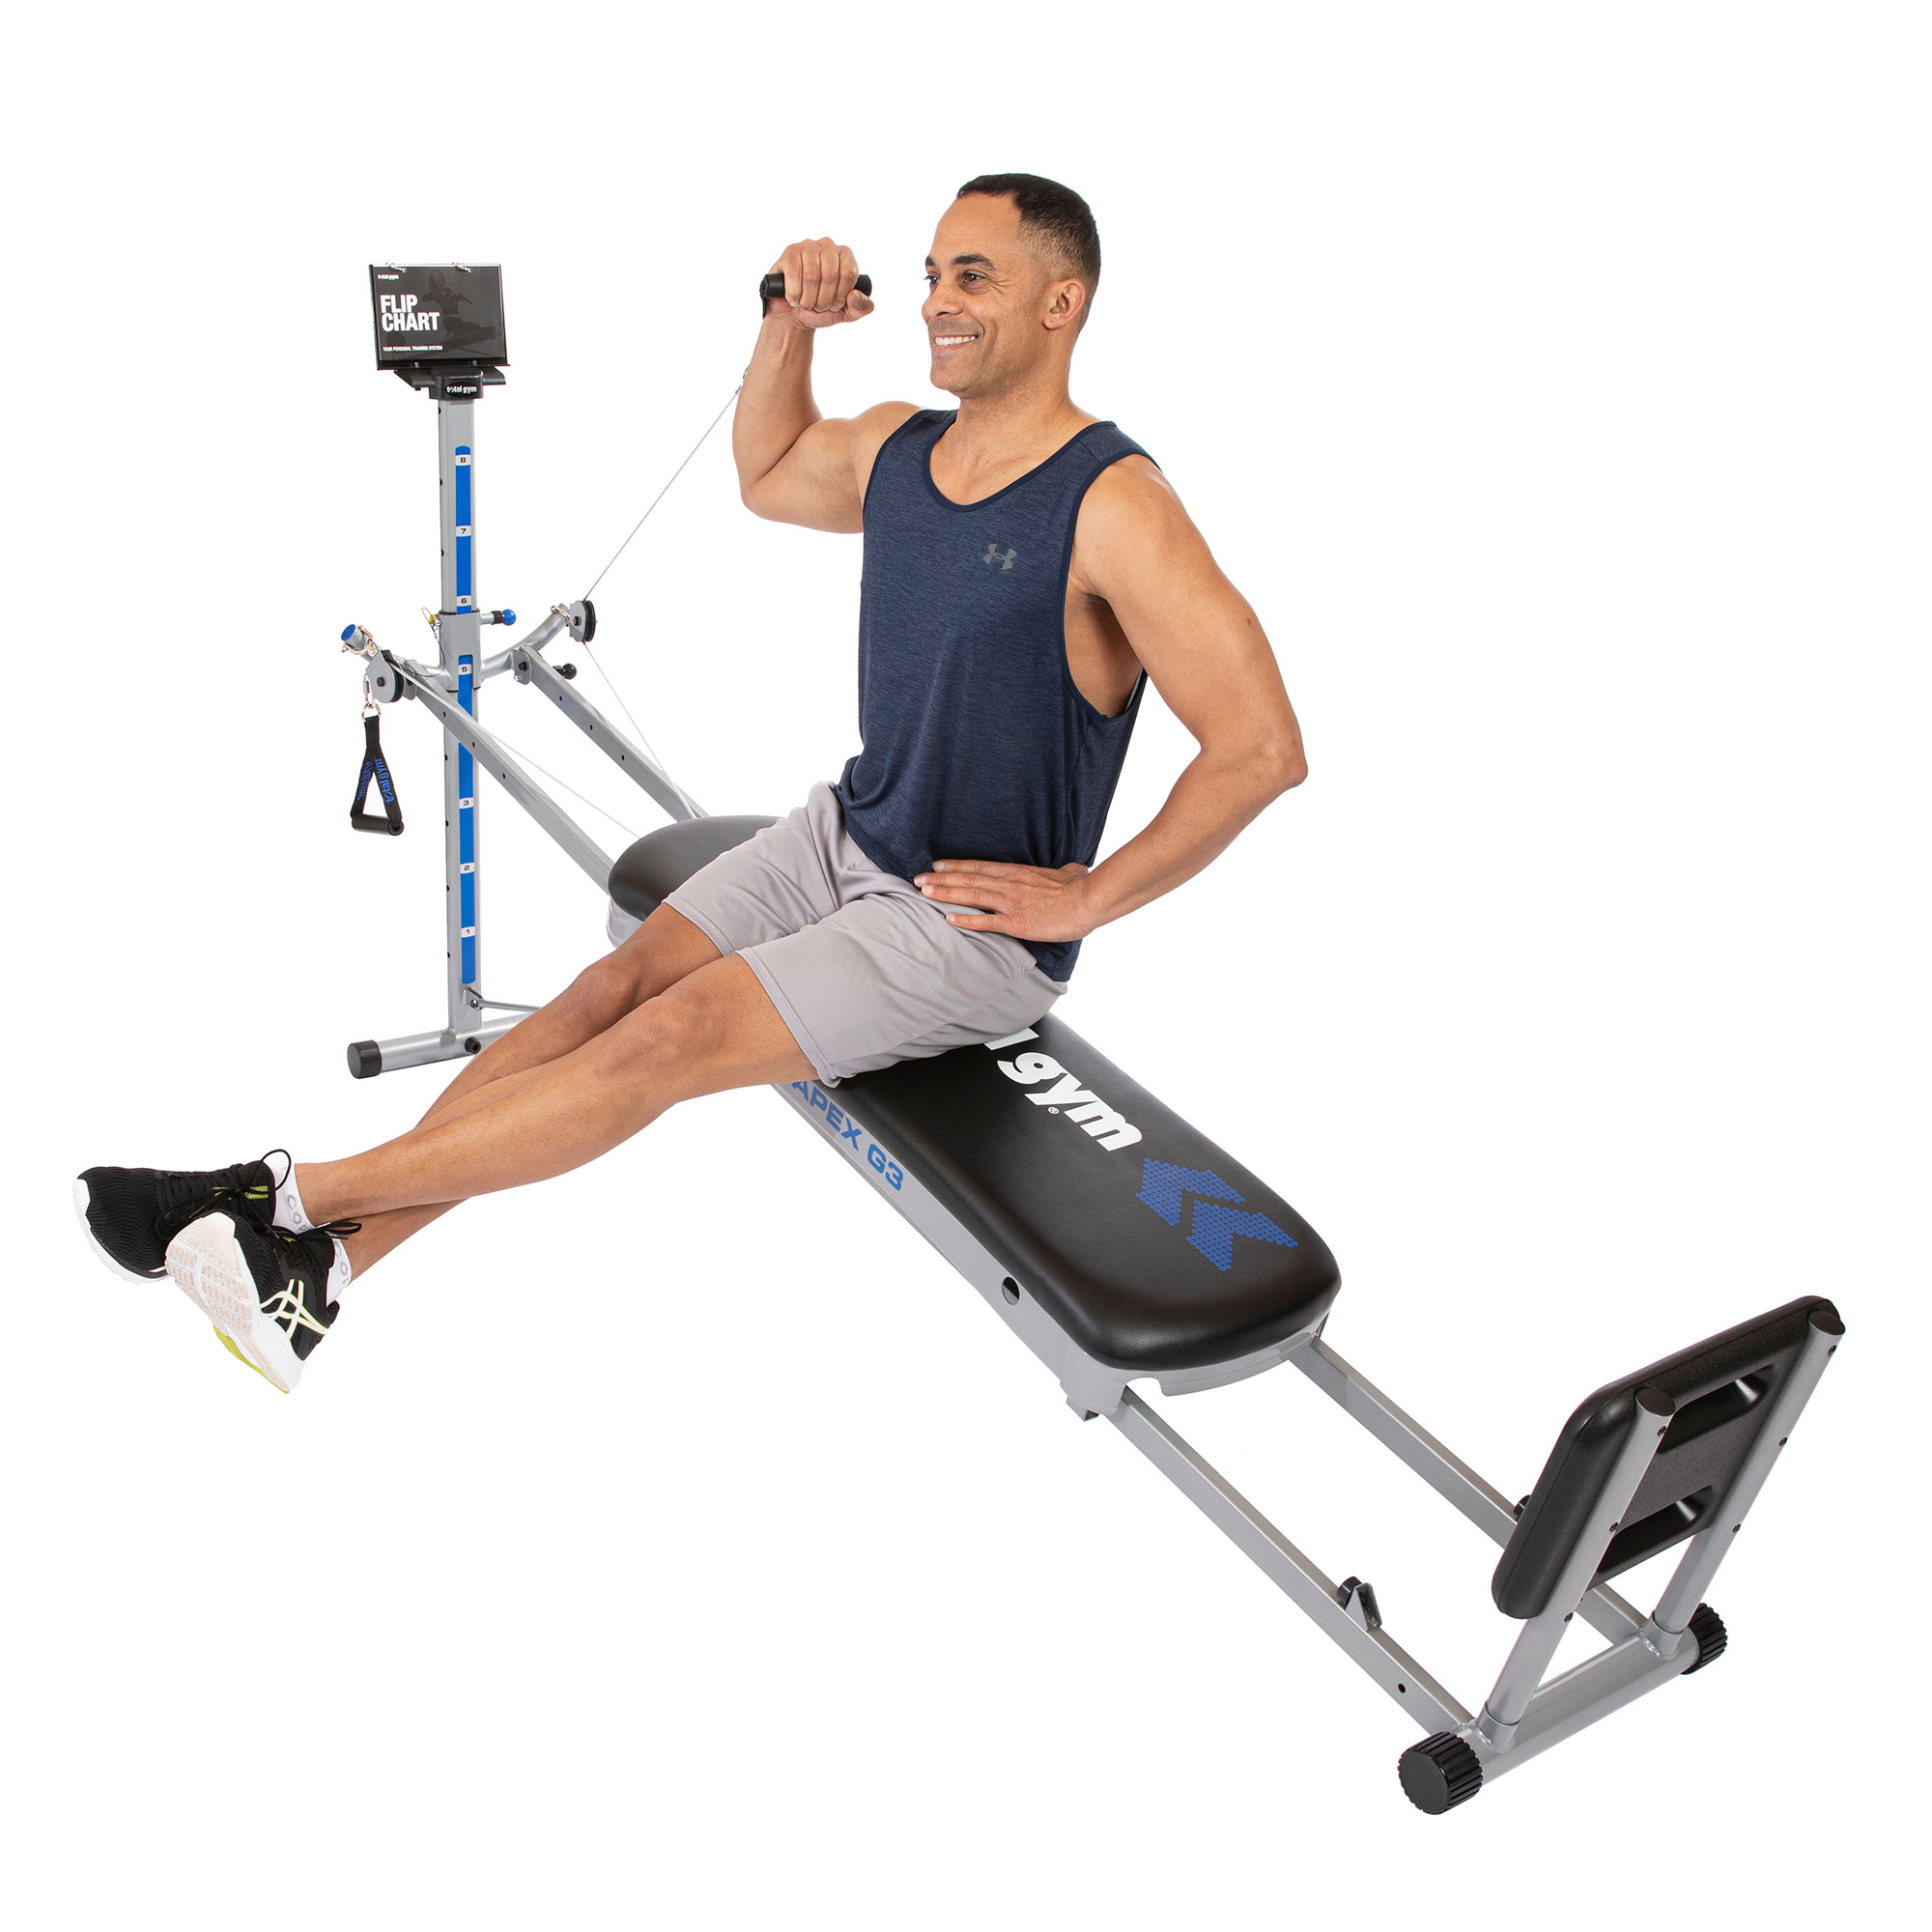 Total Gym APEX G3 Fitness Incline Weight Trainer with 8 Resistance Levels - image 5 of 11